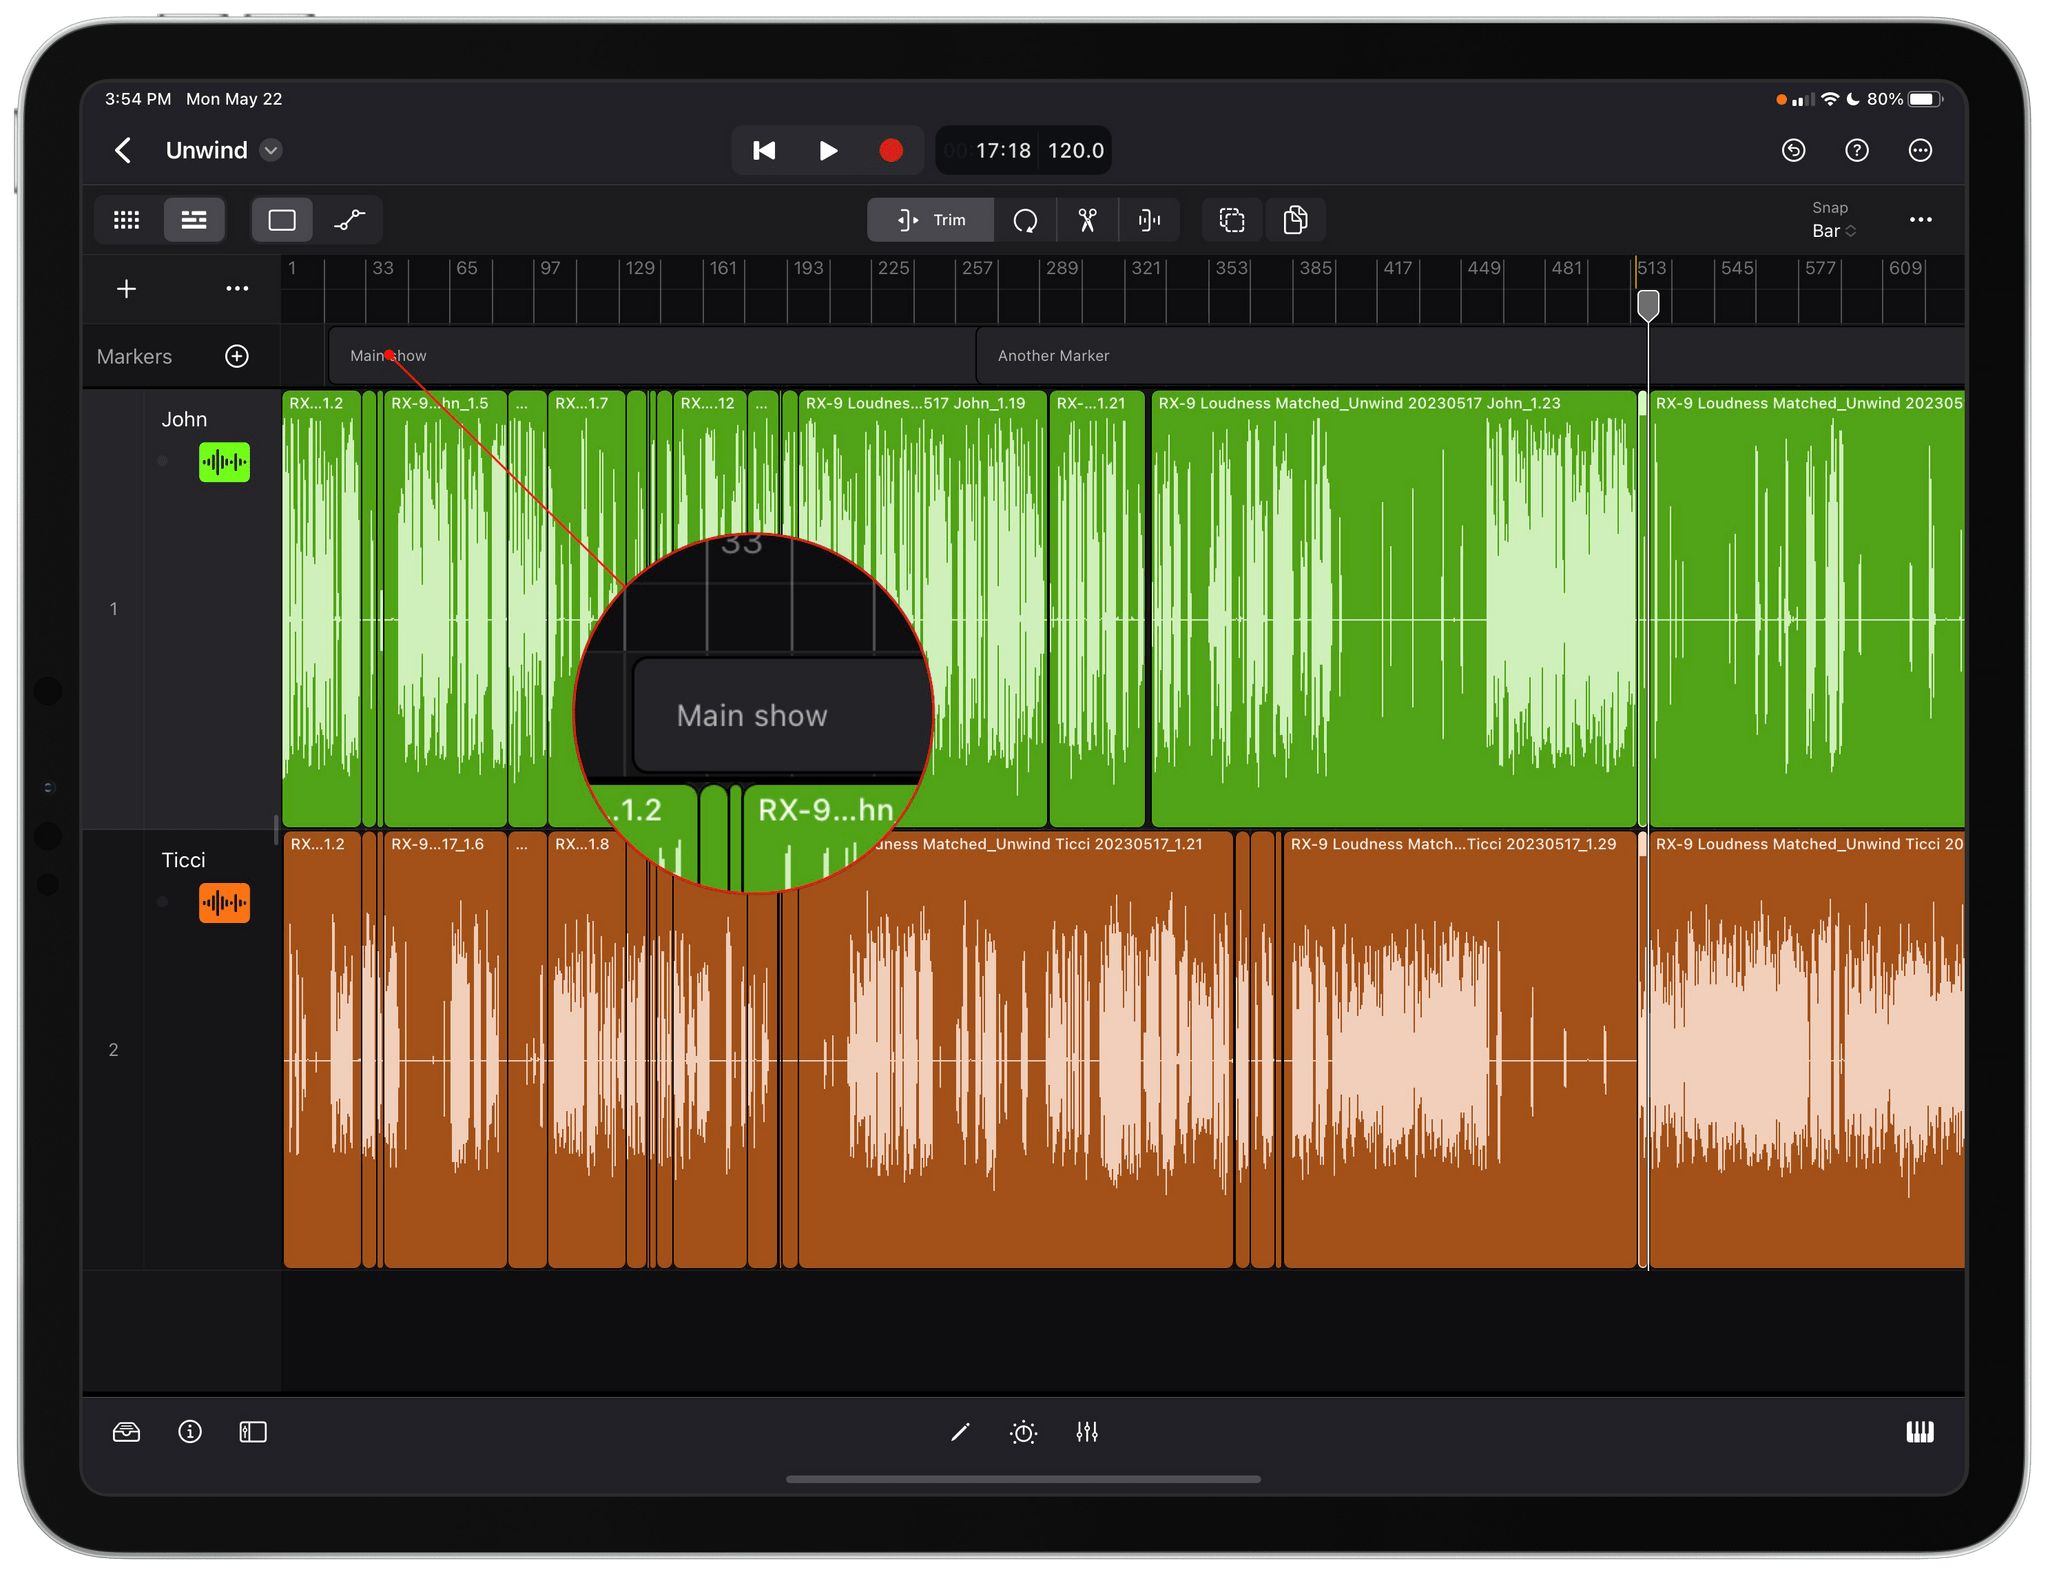 Logic Pro for iPad supports markers, which can be used to create podcast chapters.